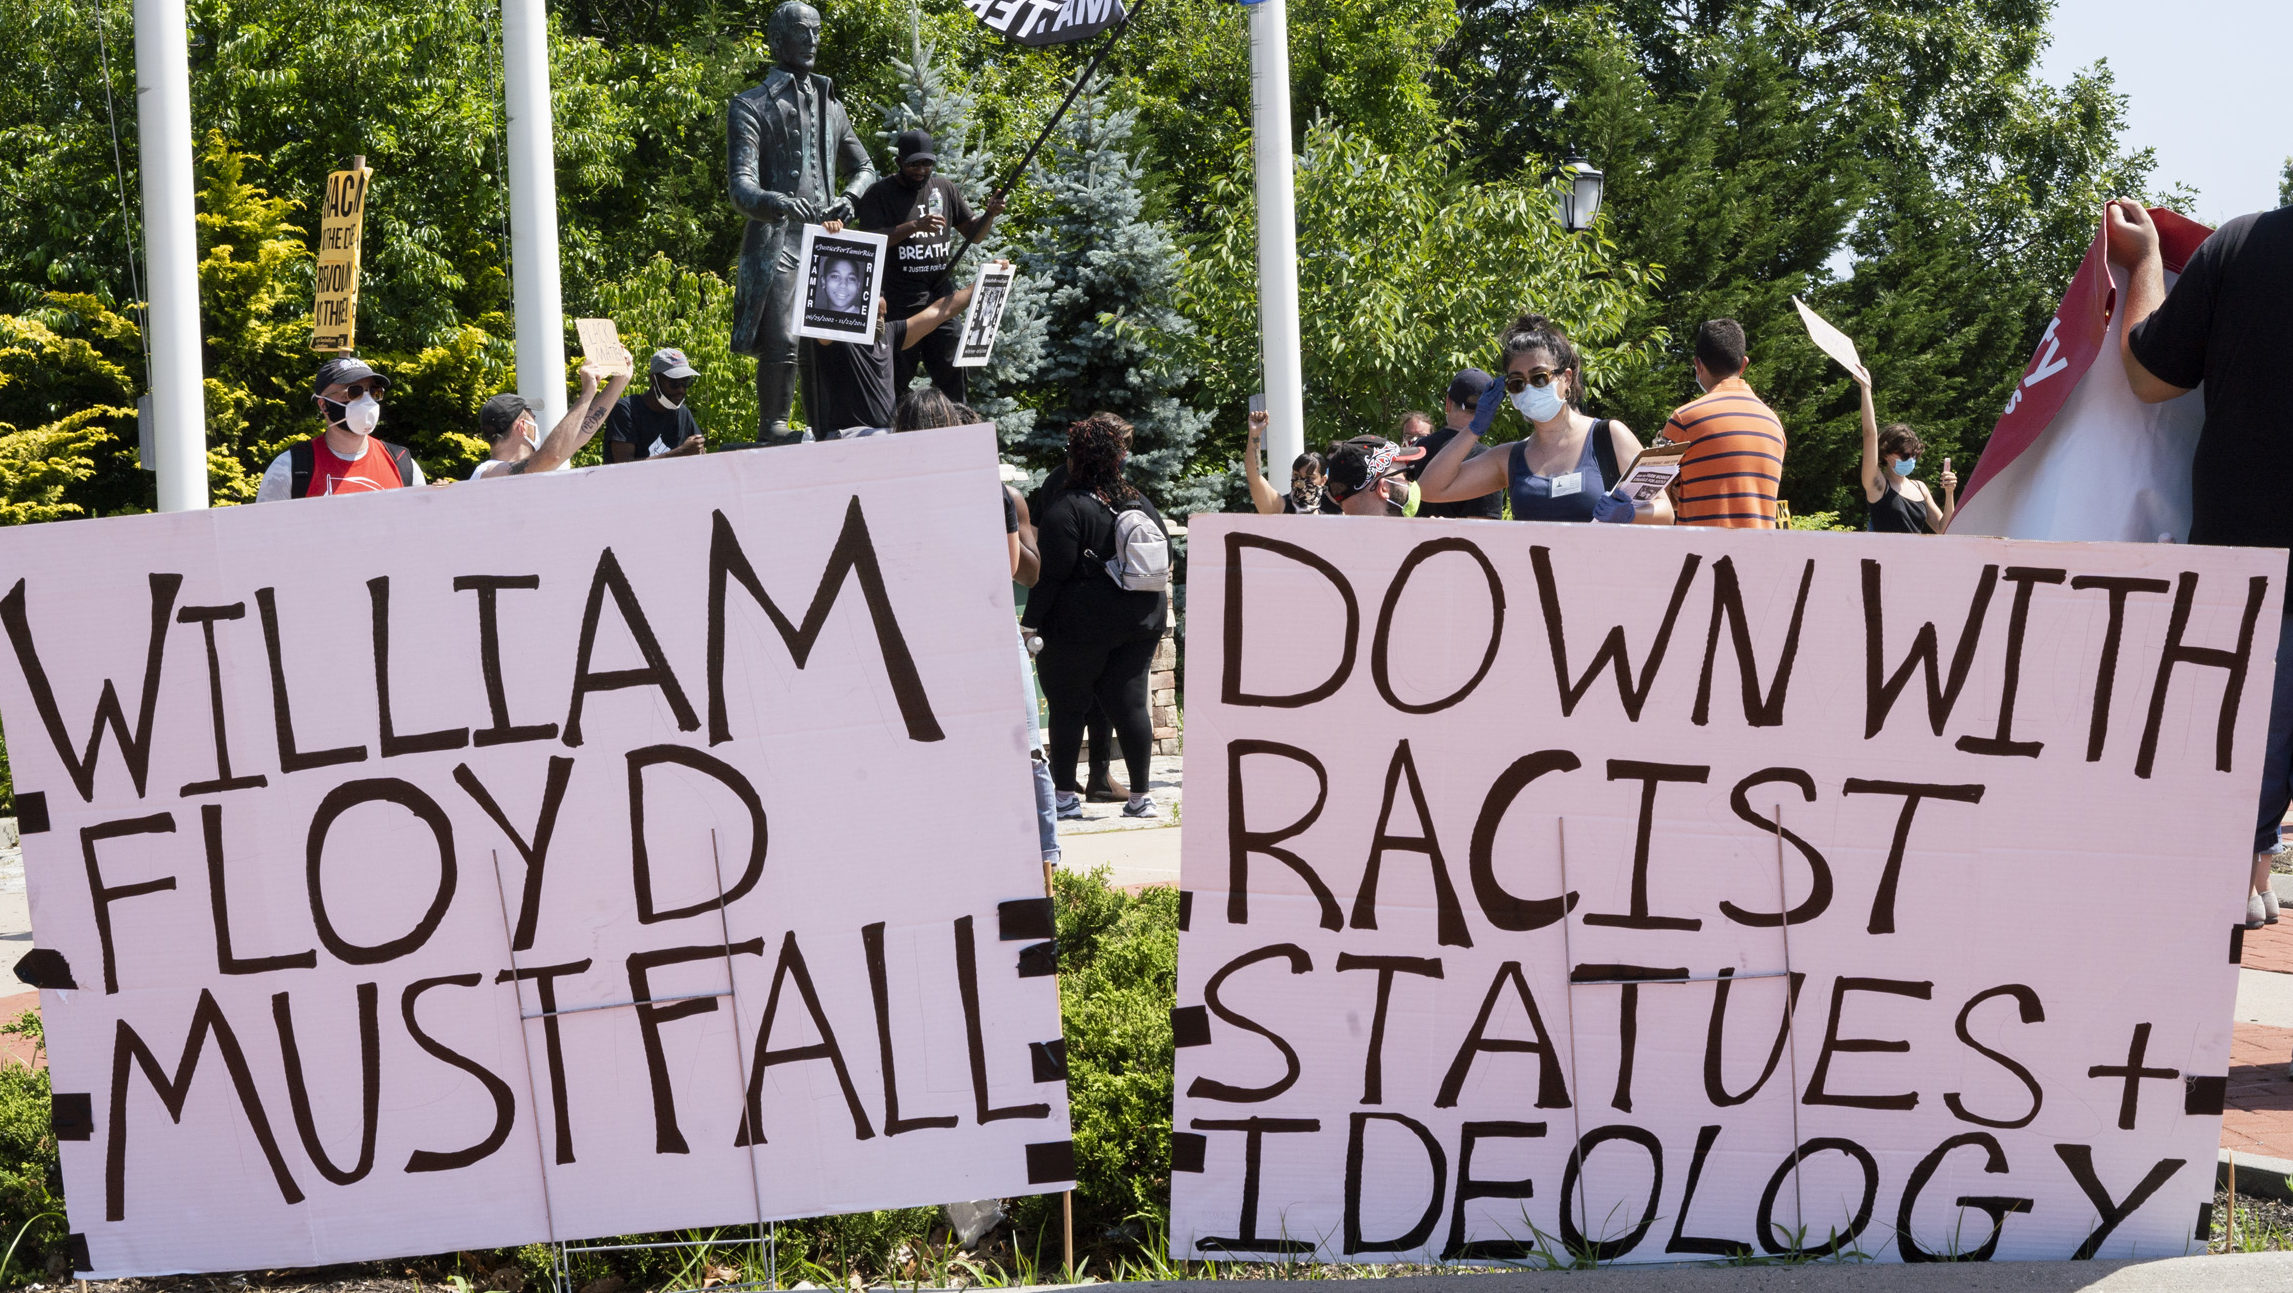 A protest in Shirley calling for the removal of slave owner William Floyds statue 5 e1594069708342